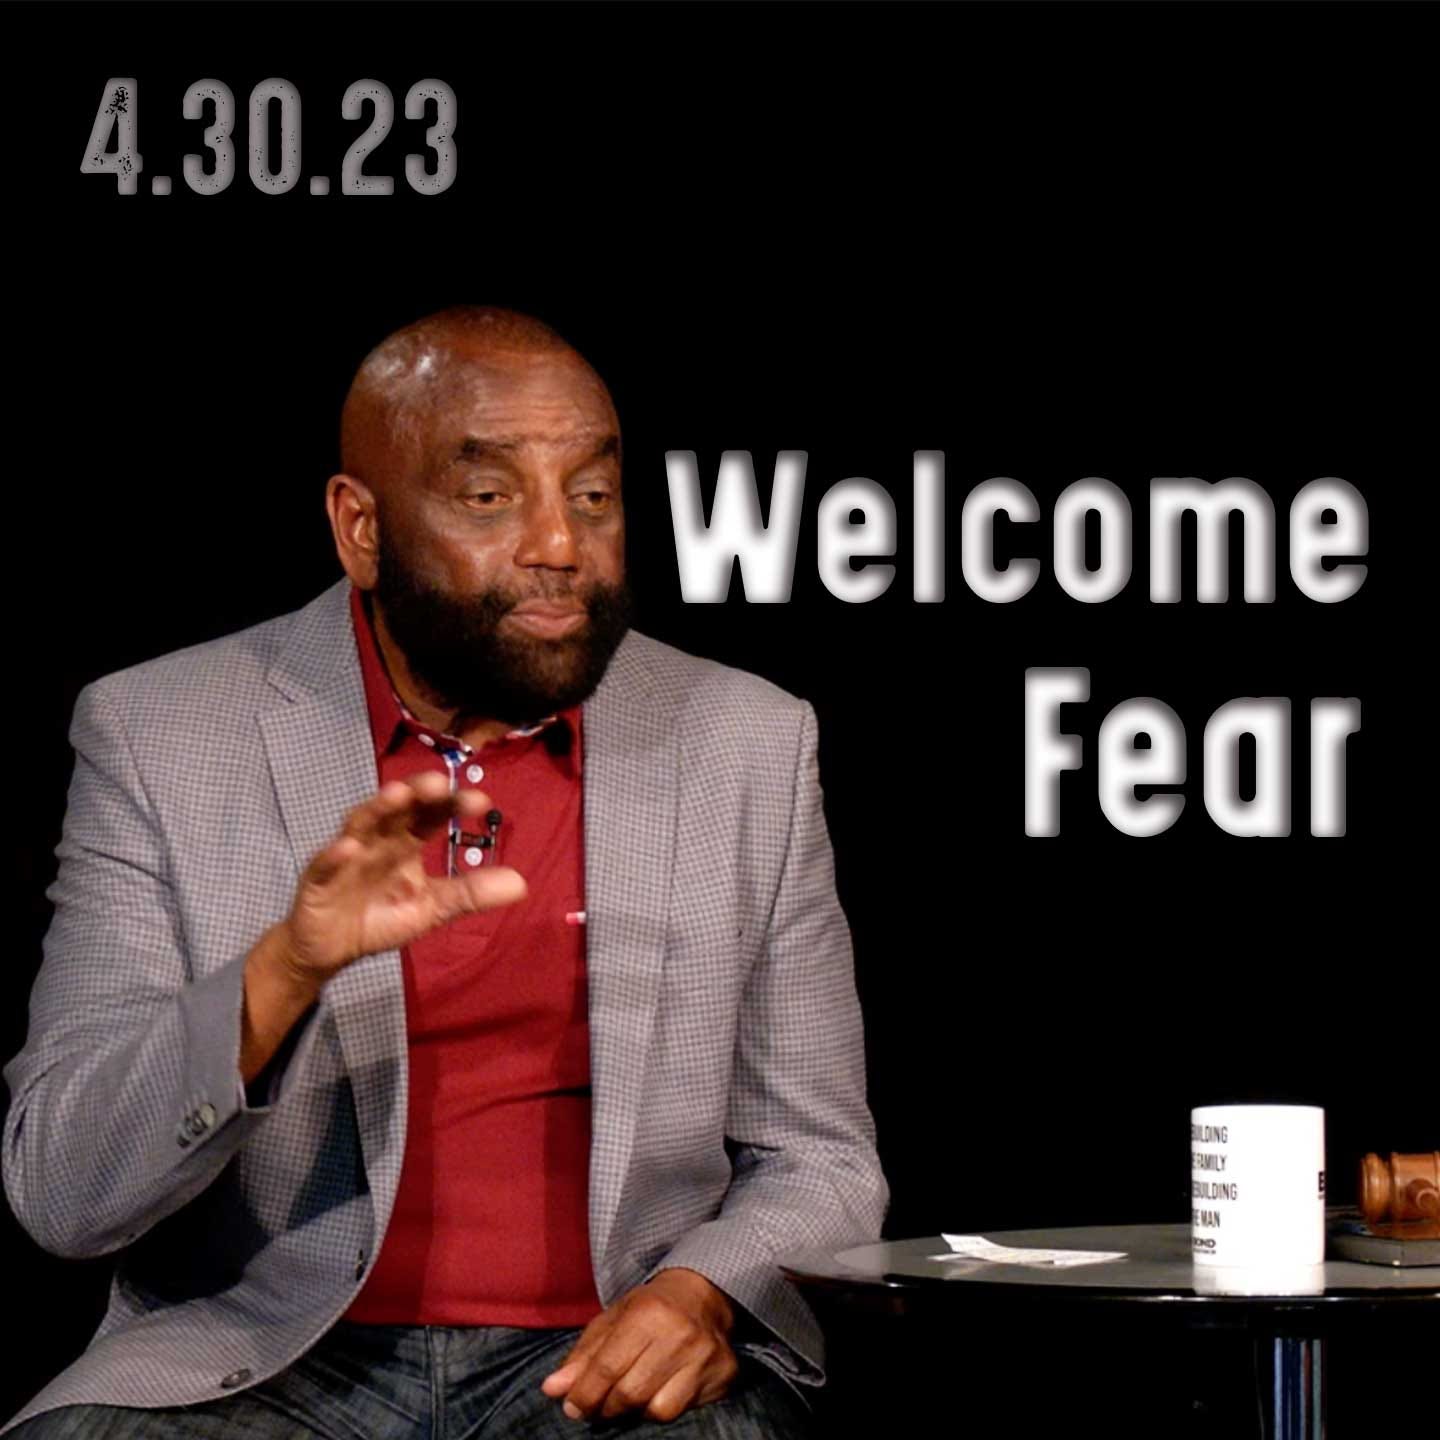 Why Do You Value Your Fear? | Church 4/30/23